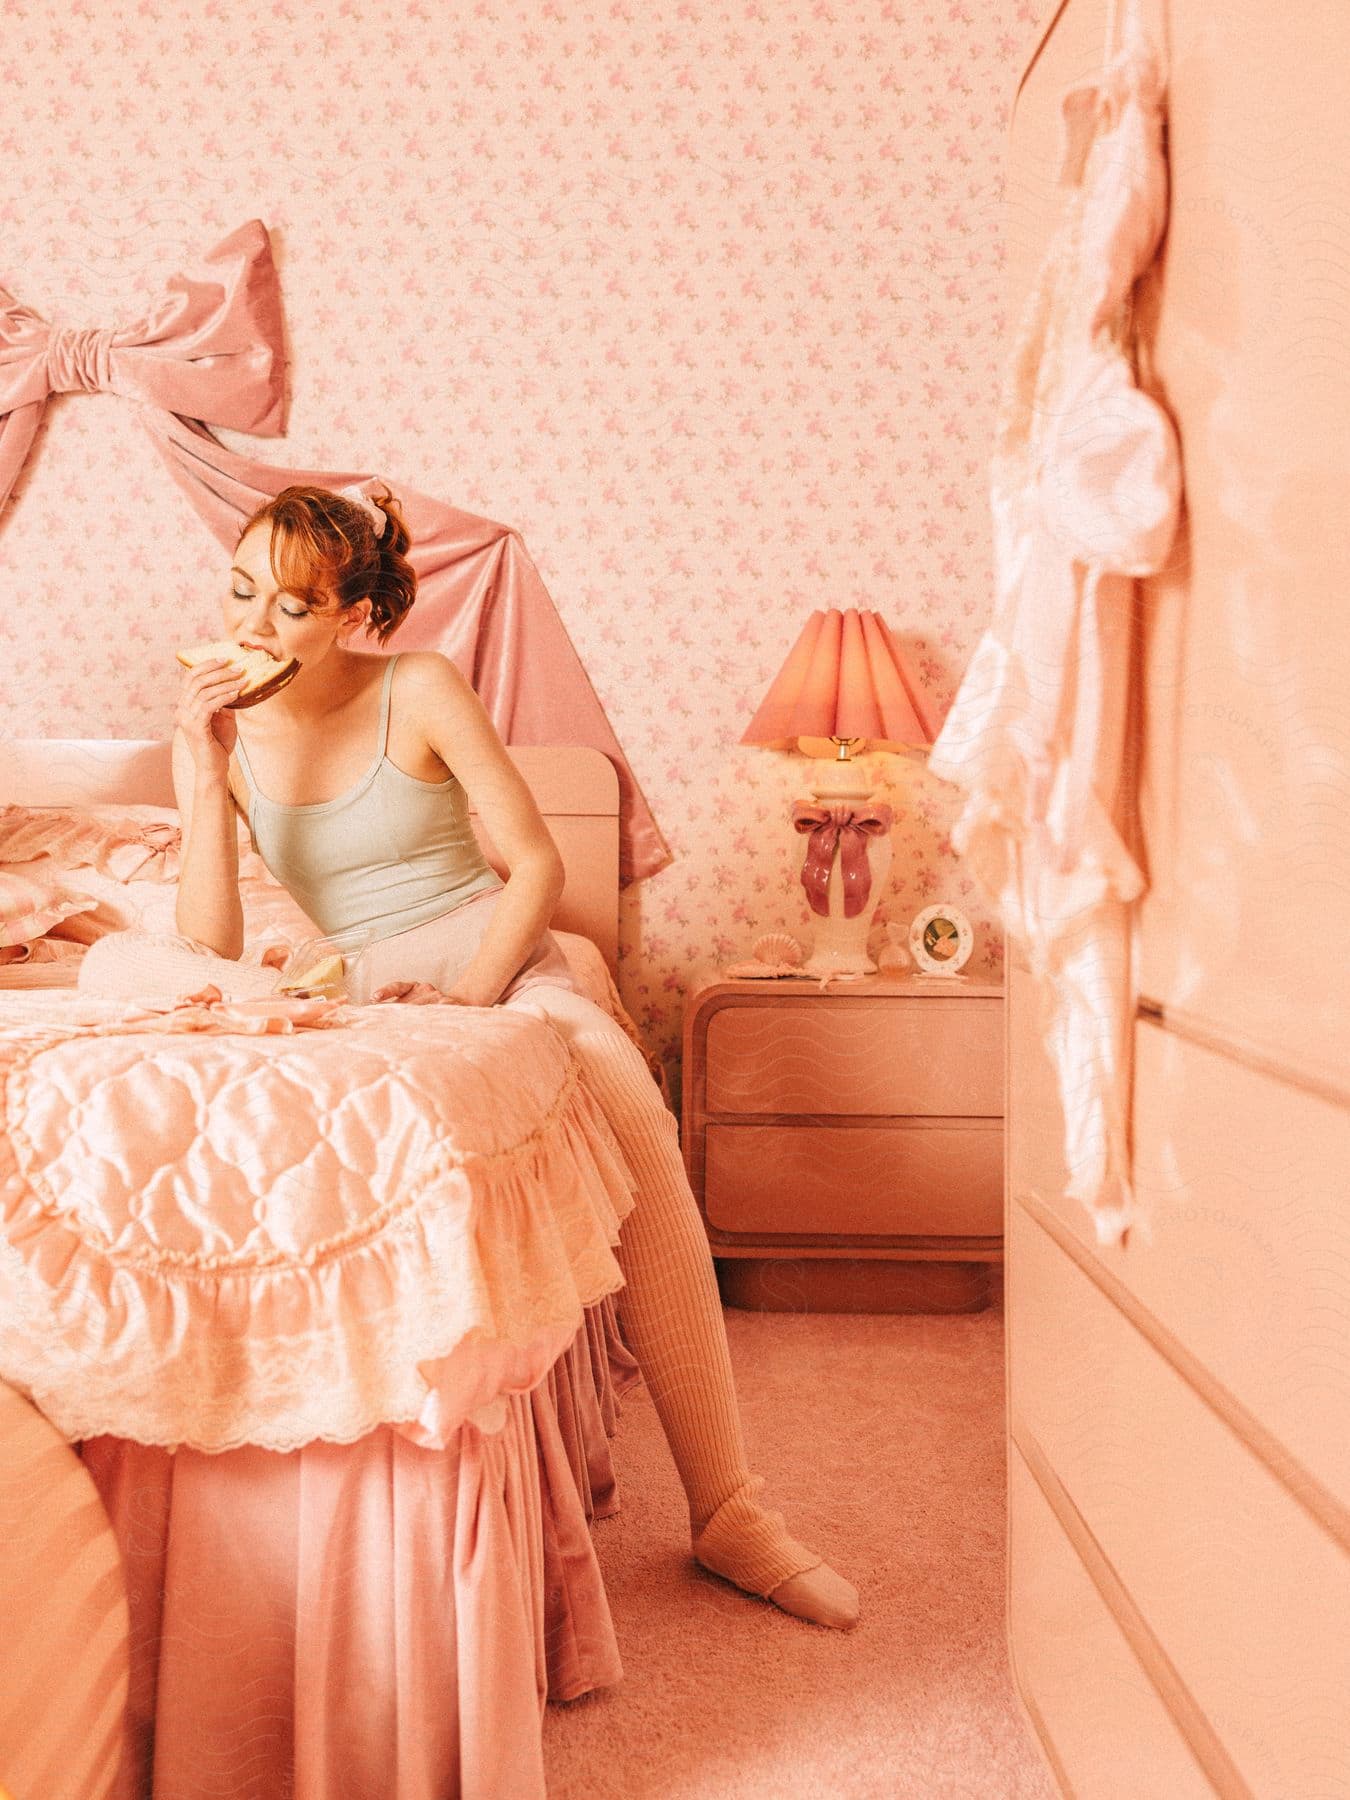 A woman in a ballet outfit sitting on a bed in a pink room, eating a slice of bread. The room is decorated with pink wallpaper, a large bow, and vintage furnishings.